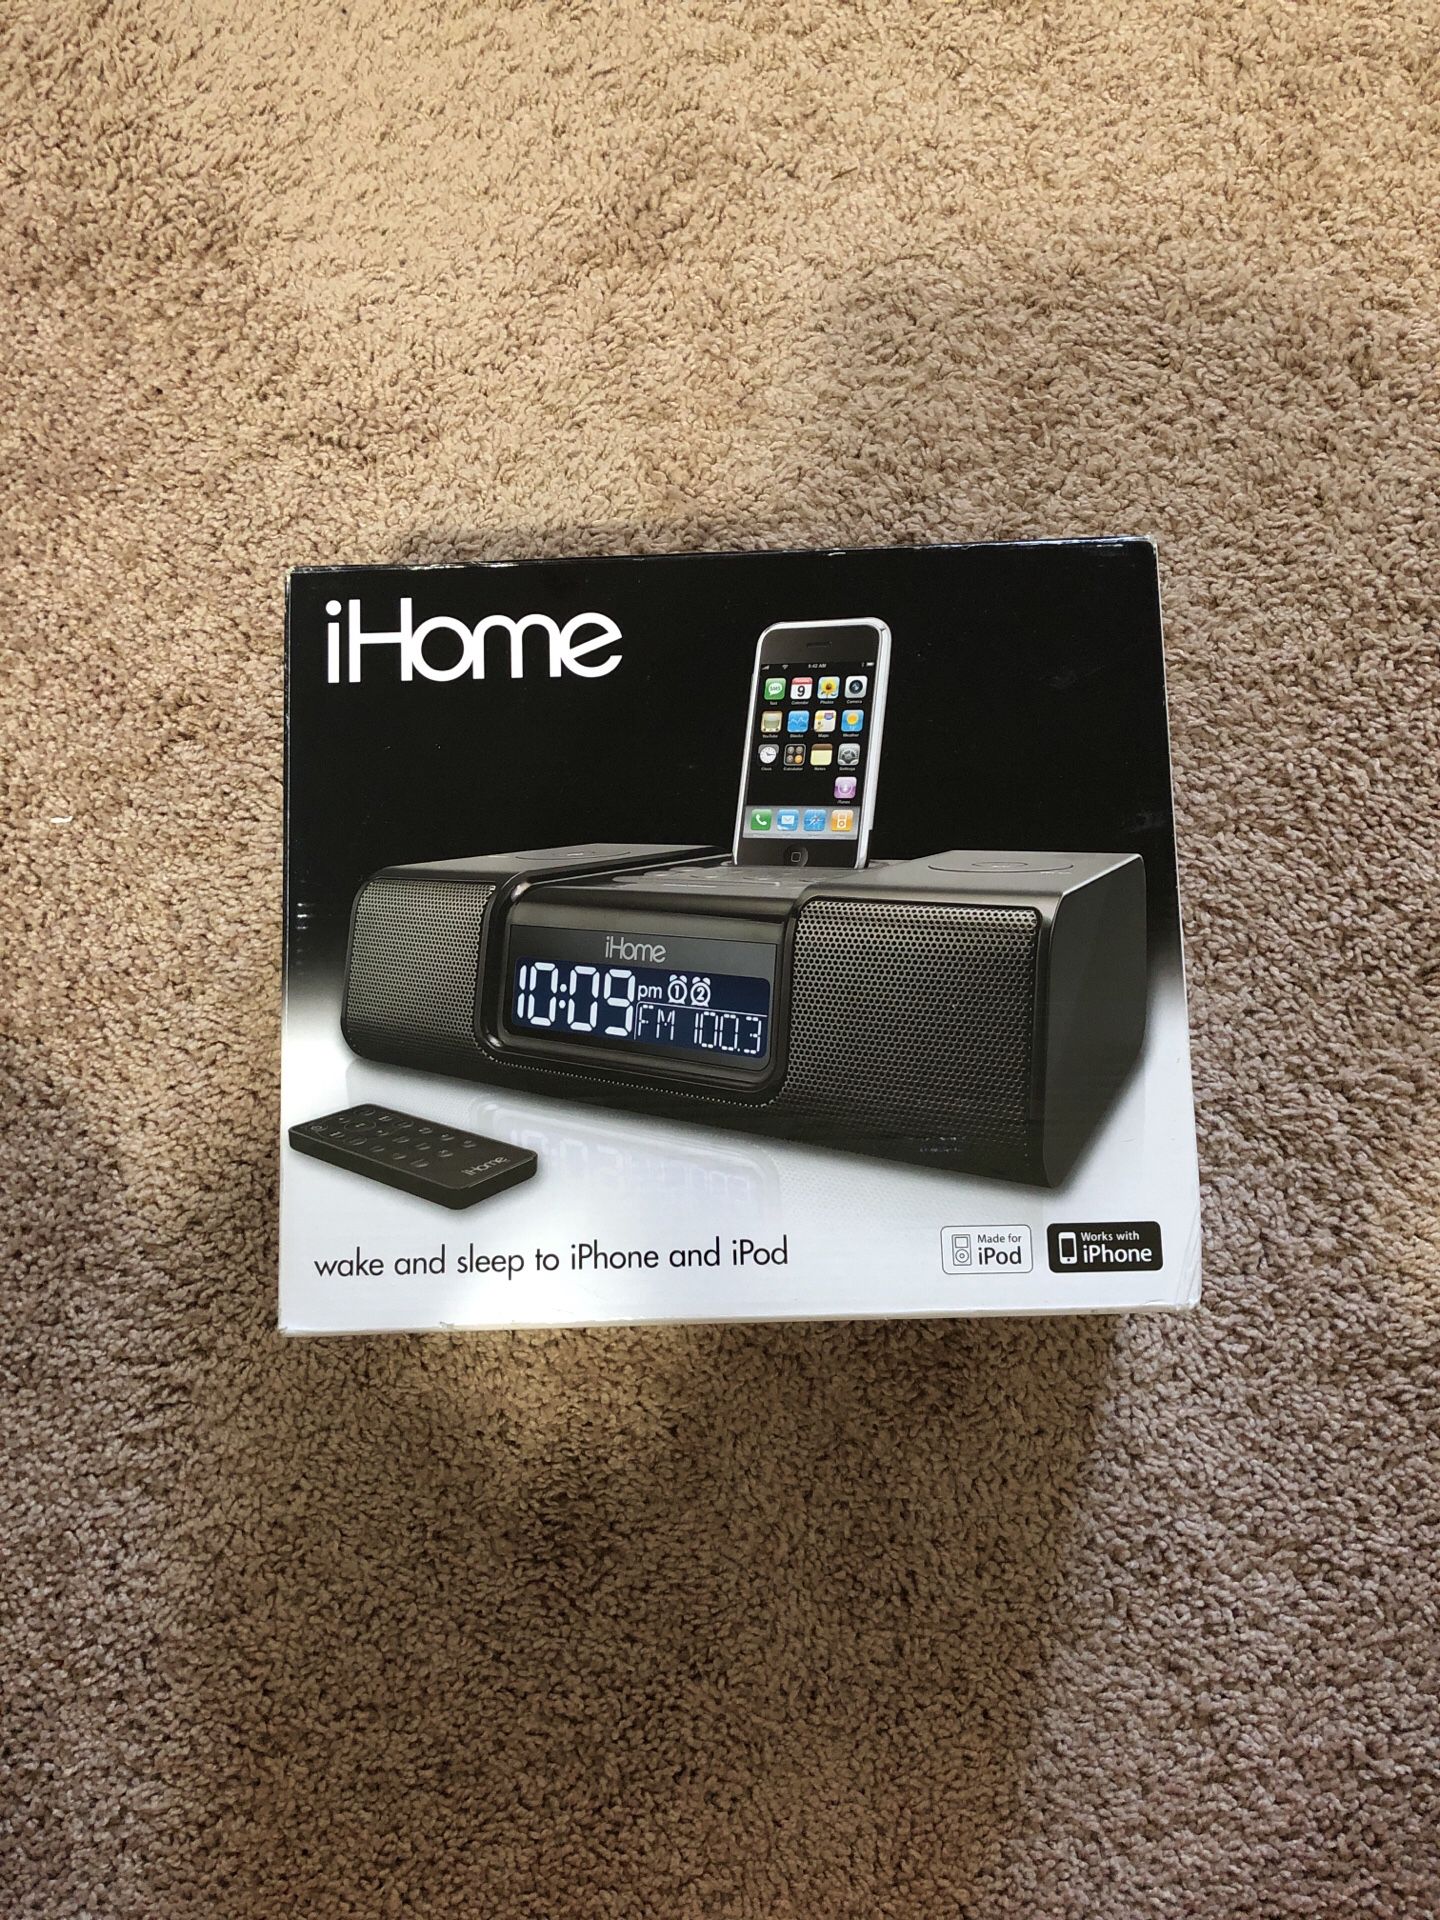 iHome radio and speakers for iPhone iPod